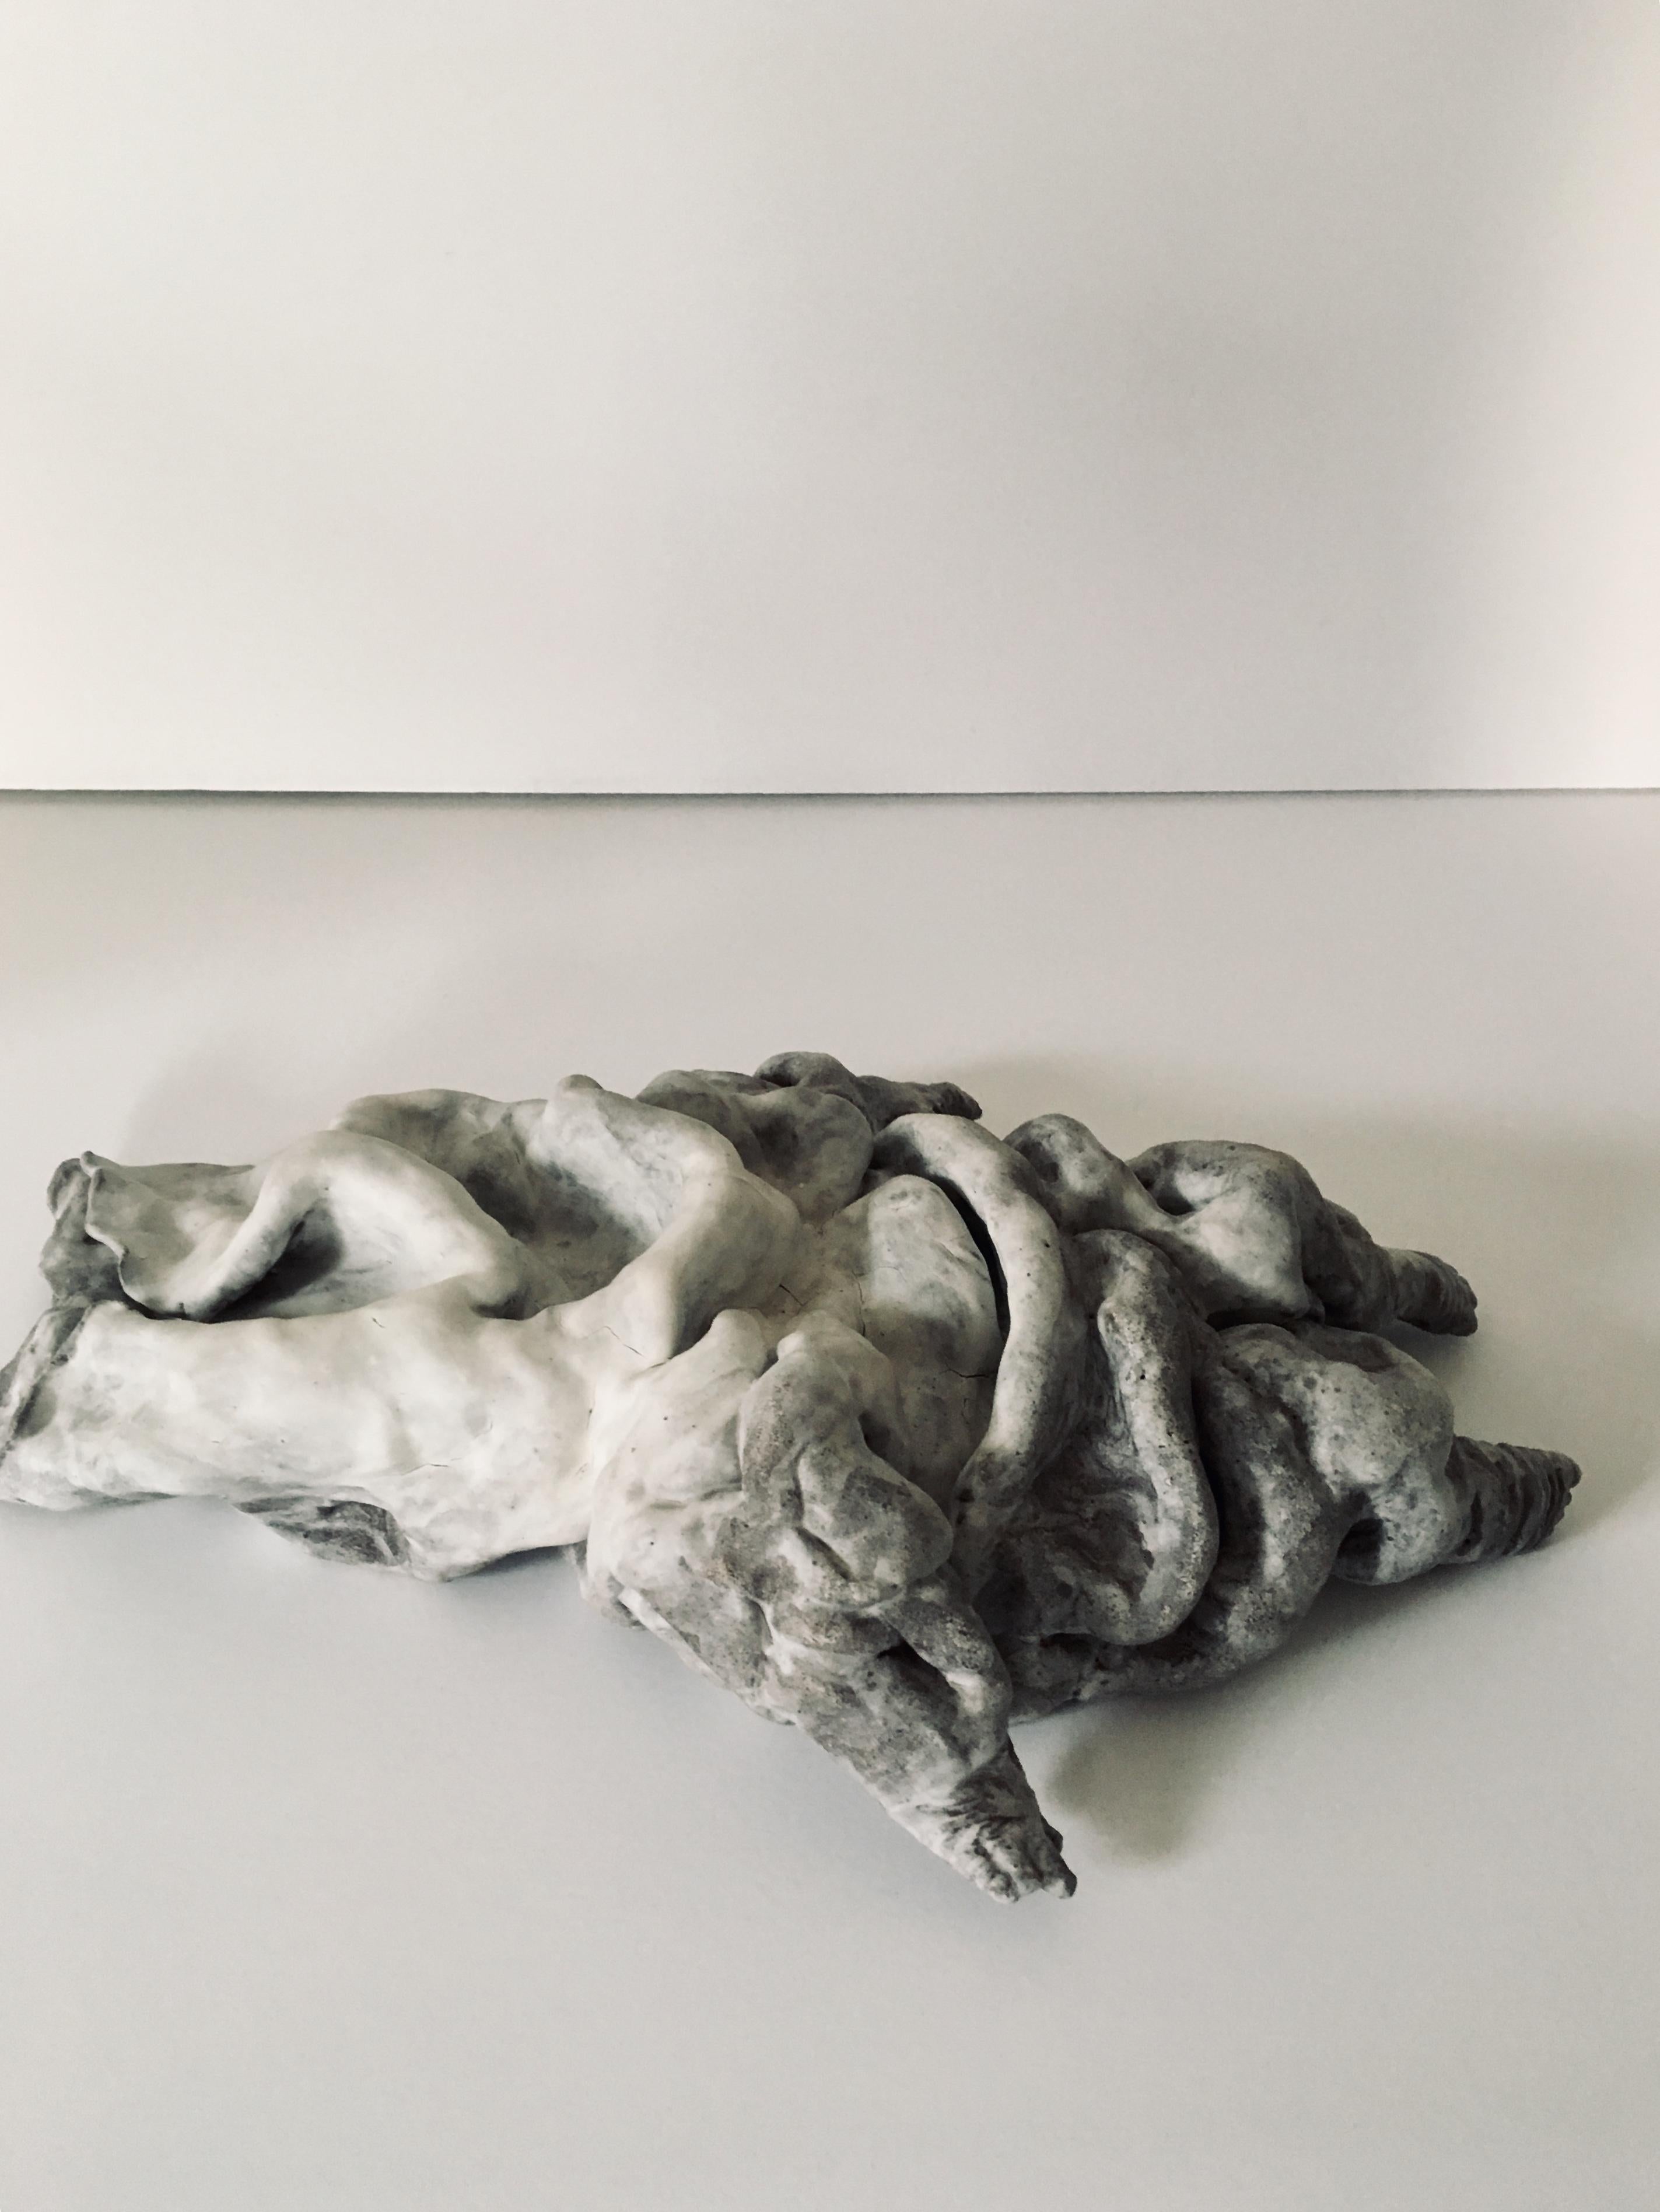 Ceramic figure lying down, sculpture: Figurative 'Wasted' - Gray Figurative Sculpture by Kenjiro Kitade